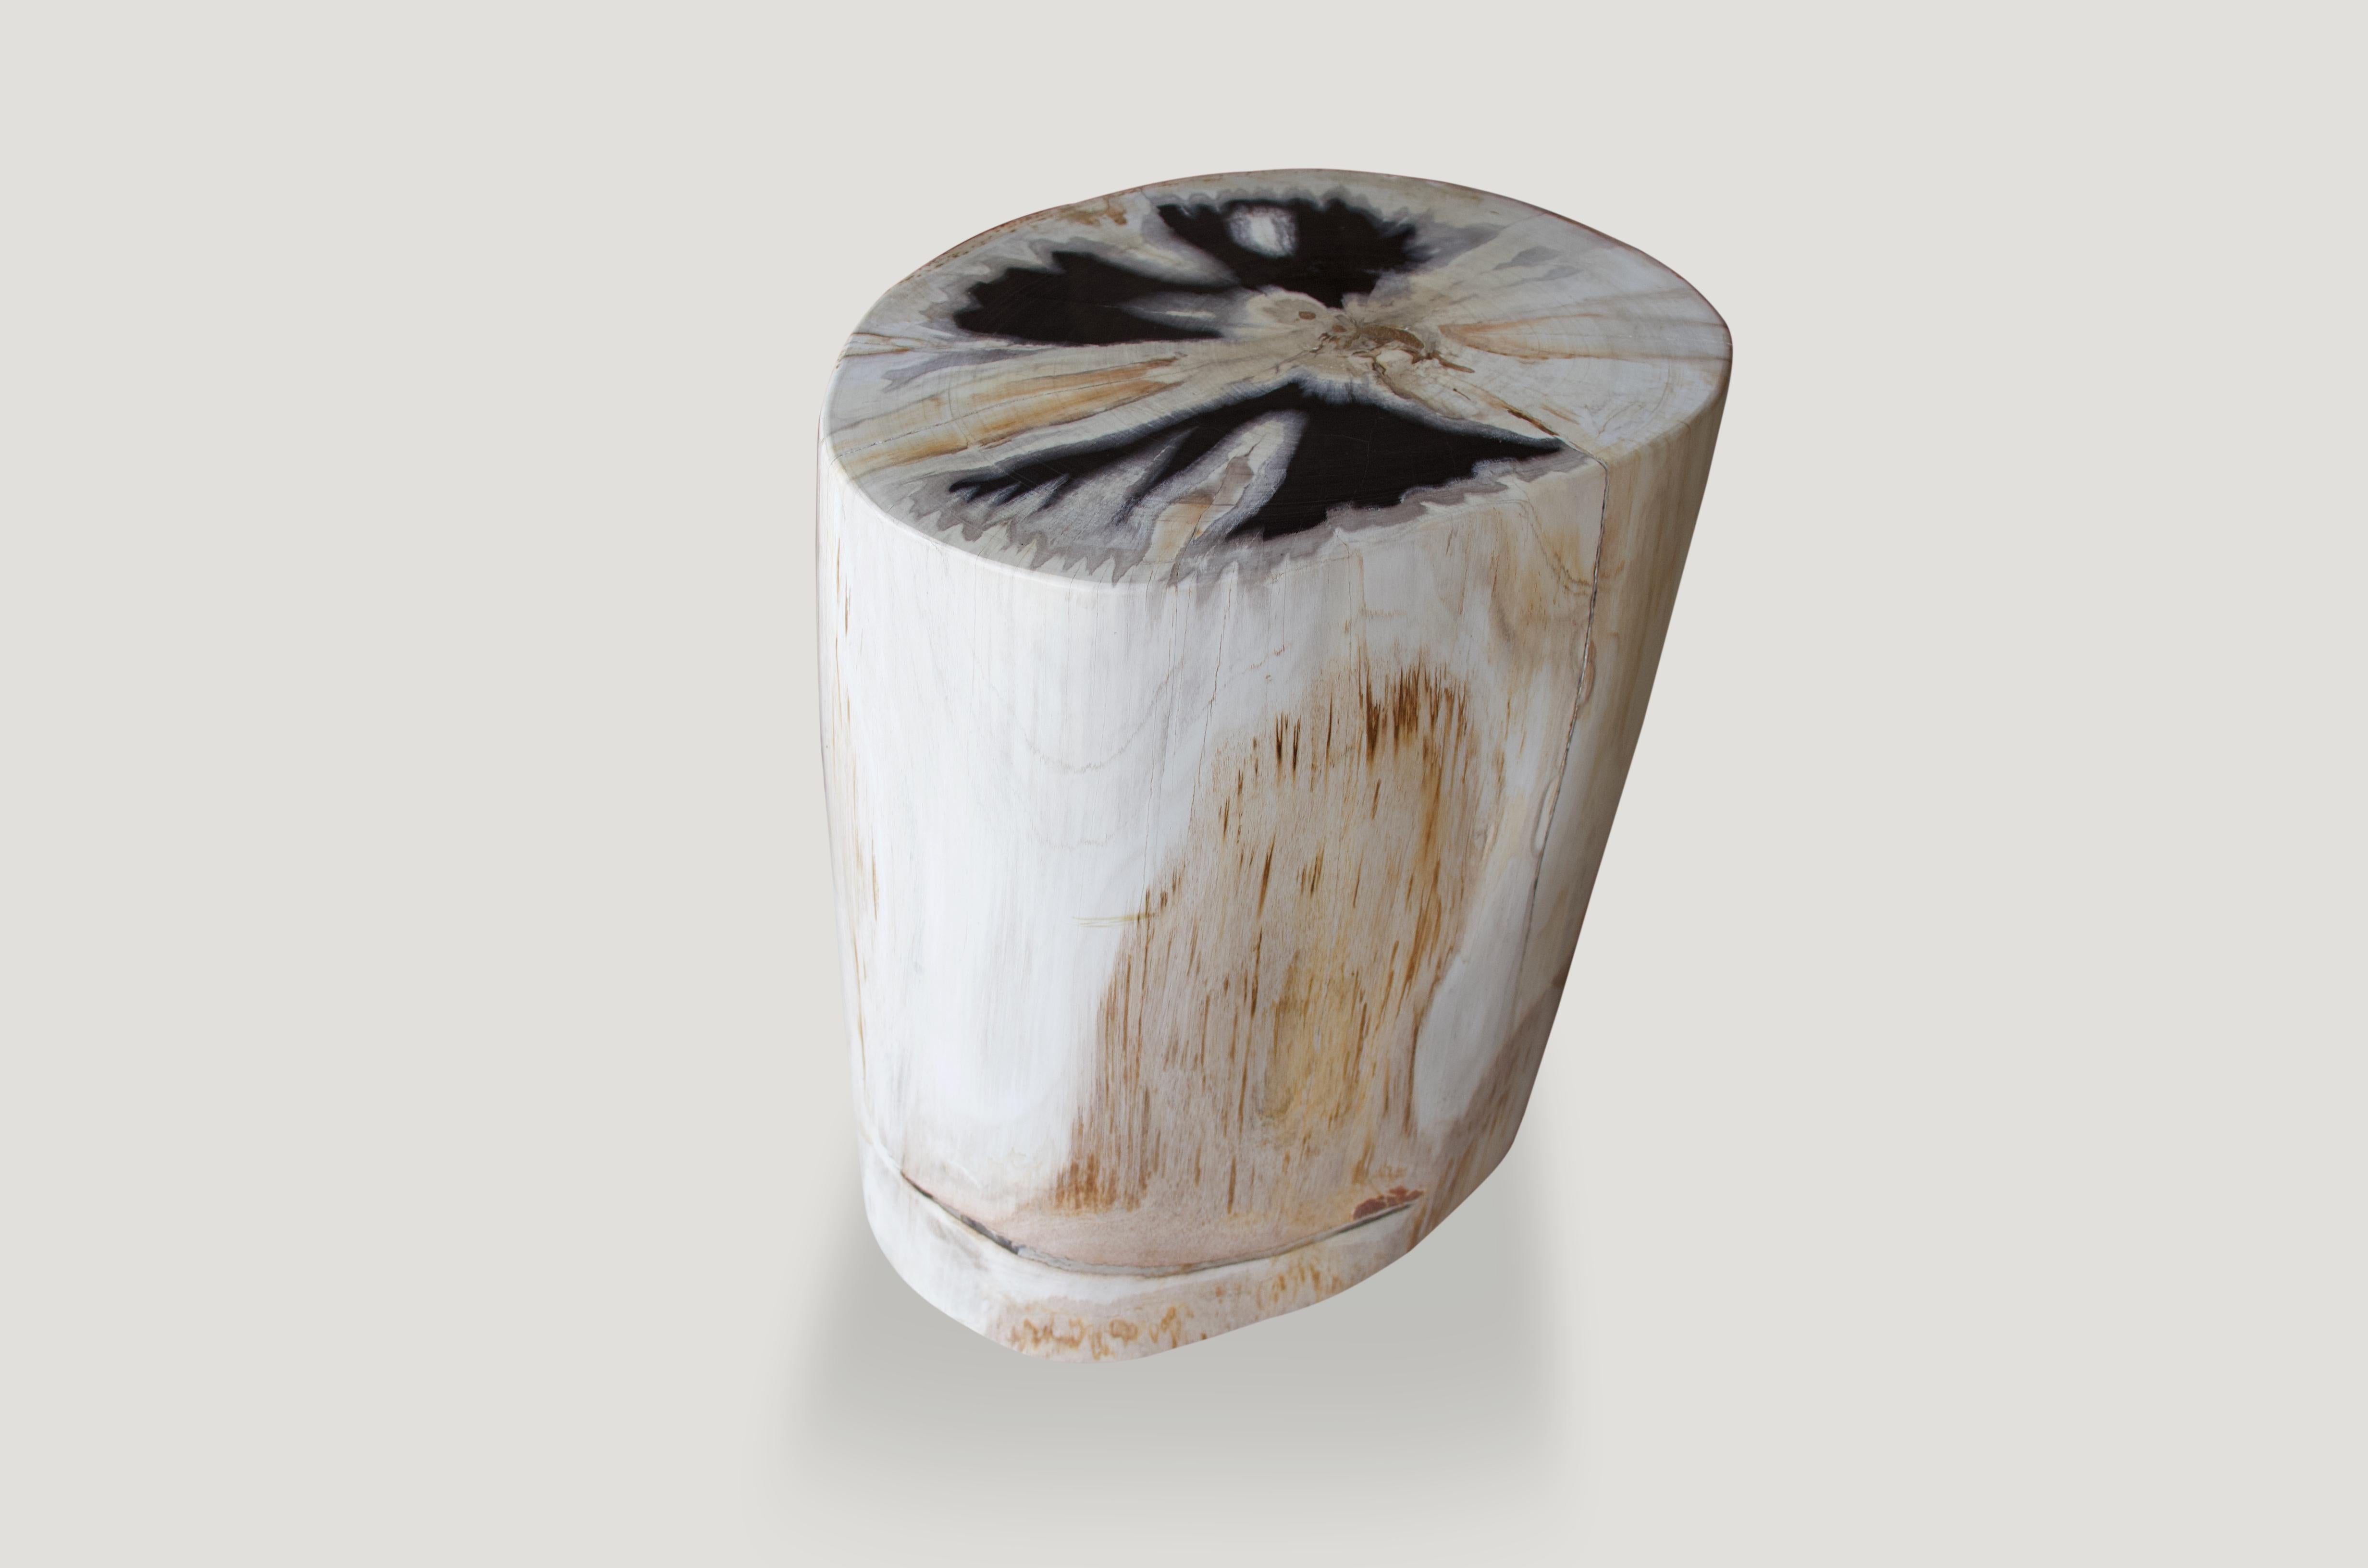 Stunning, contrasting tones in this super smooth, high quality petrified wood side table.

As with a diamond, we polish the highest quality fossilized petrified wood, using our latest ground breaking technology, to reveal its natural beauty and